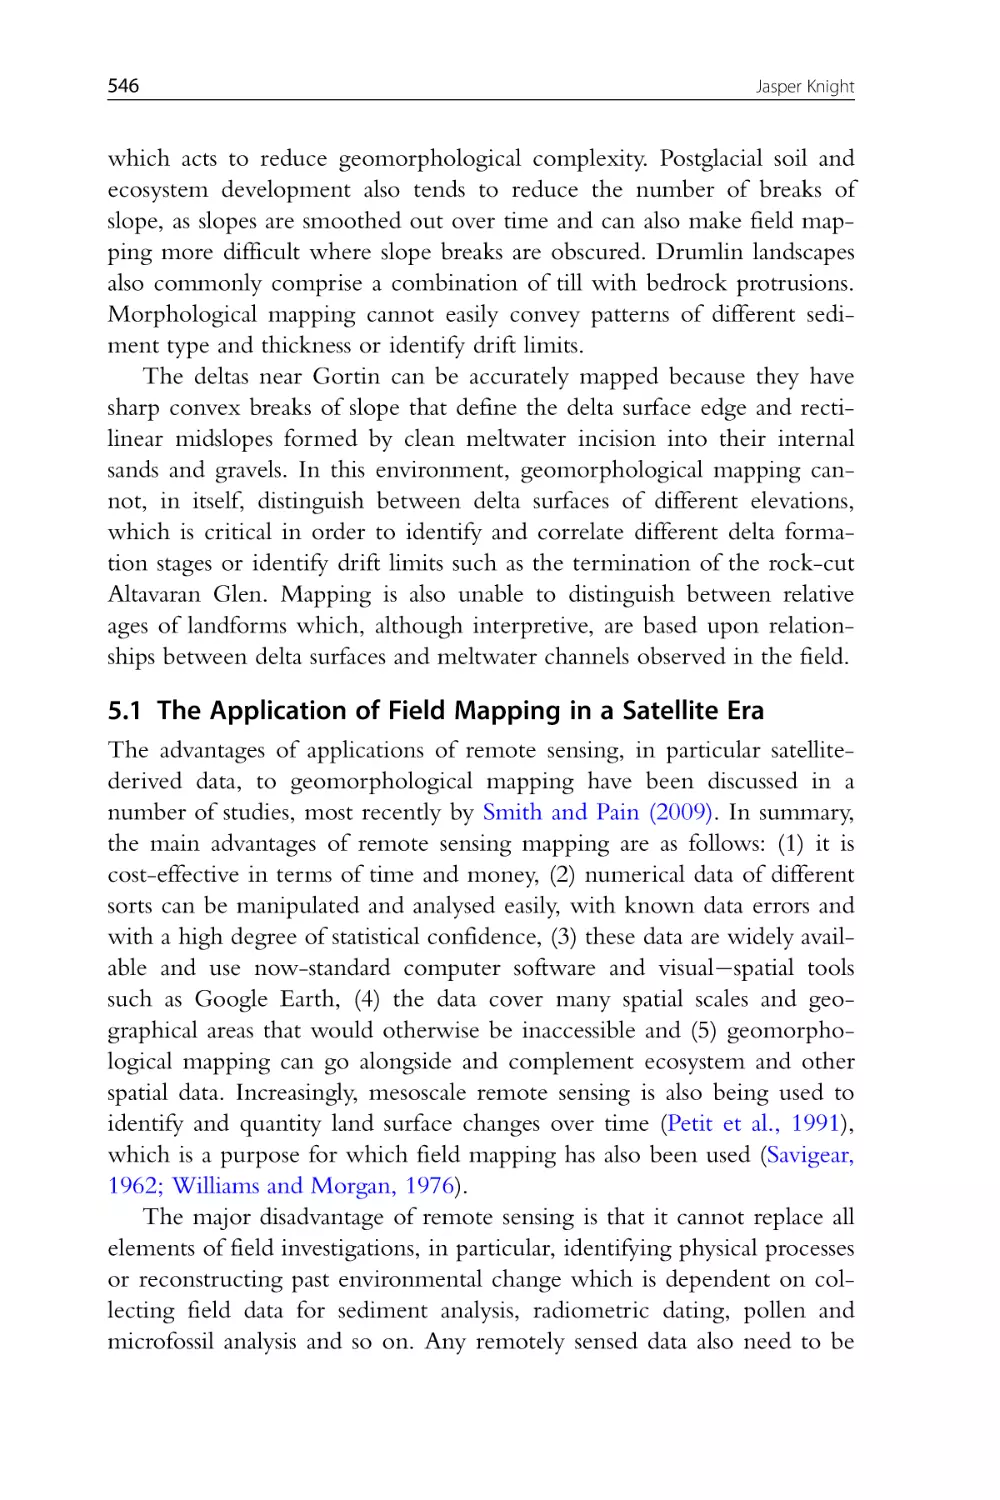 5.1 The Application of Field Mapping in a Satellite Era